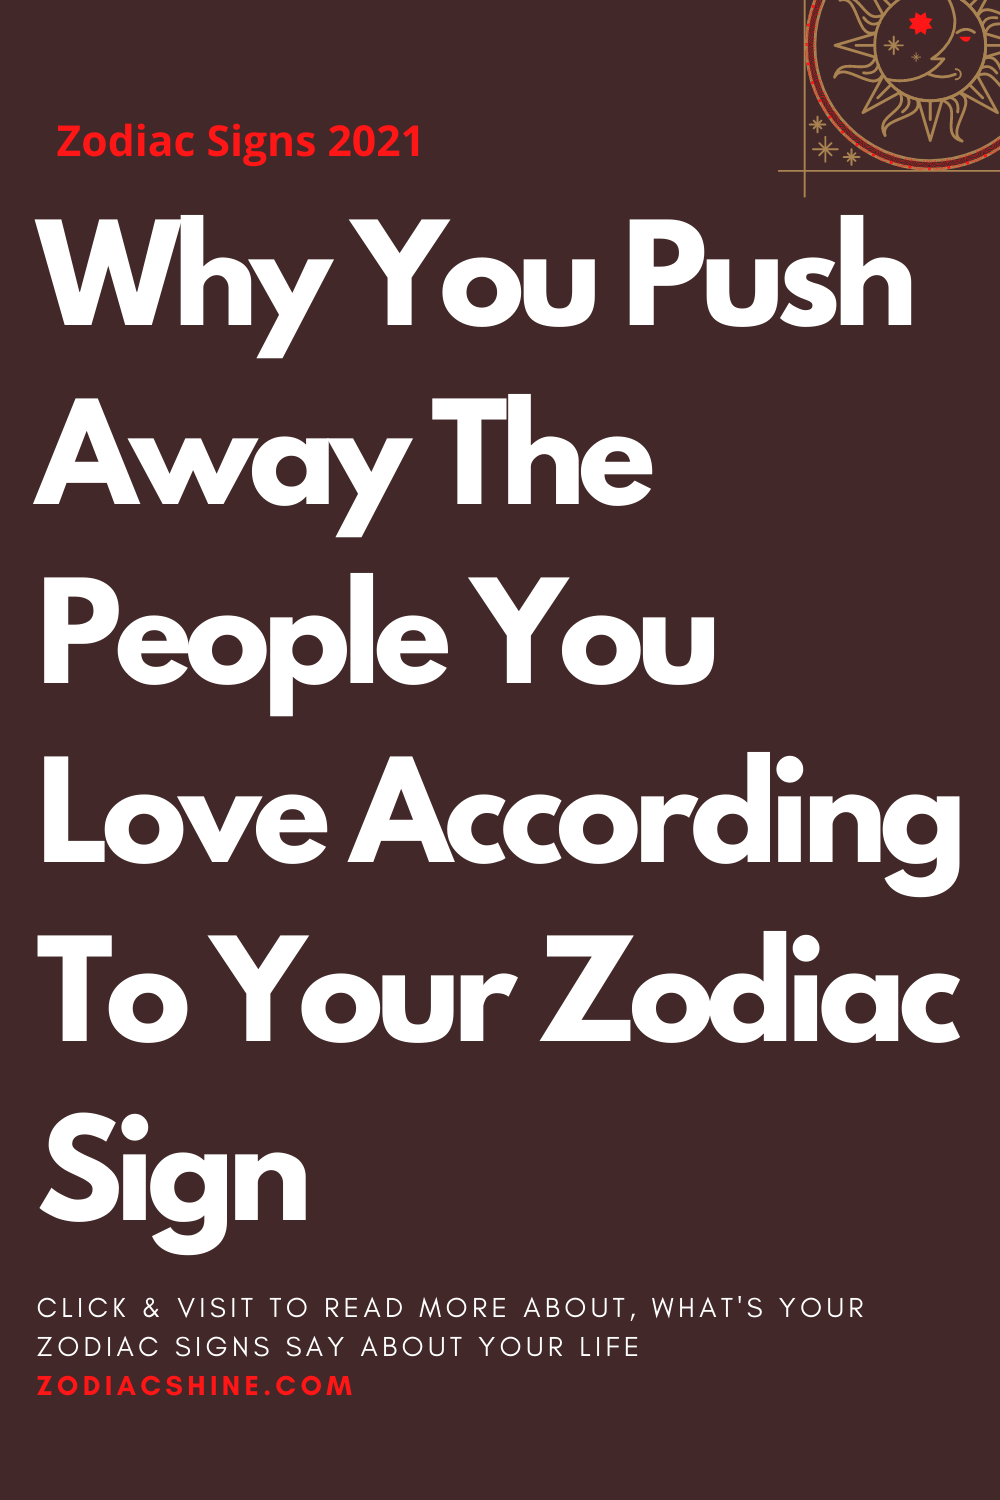 Why You Push Away The People You Love According To Your Zodiac Sign